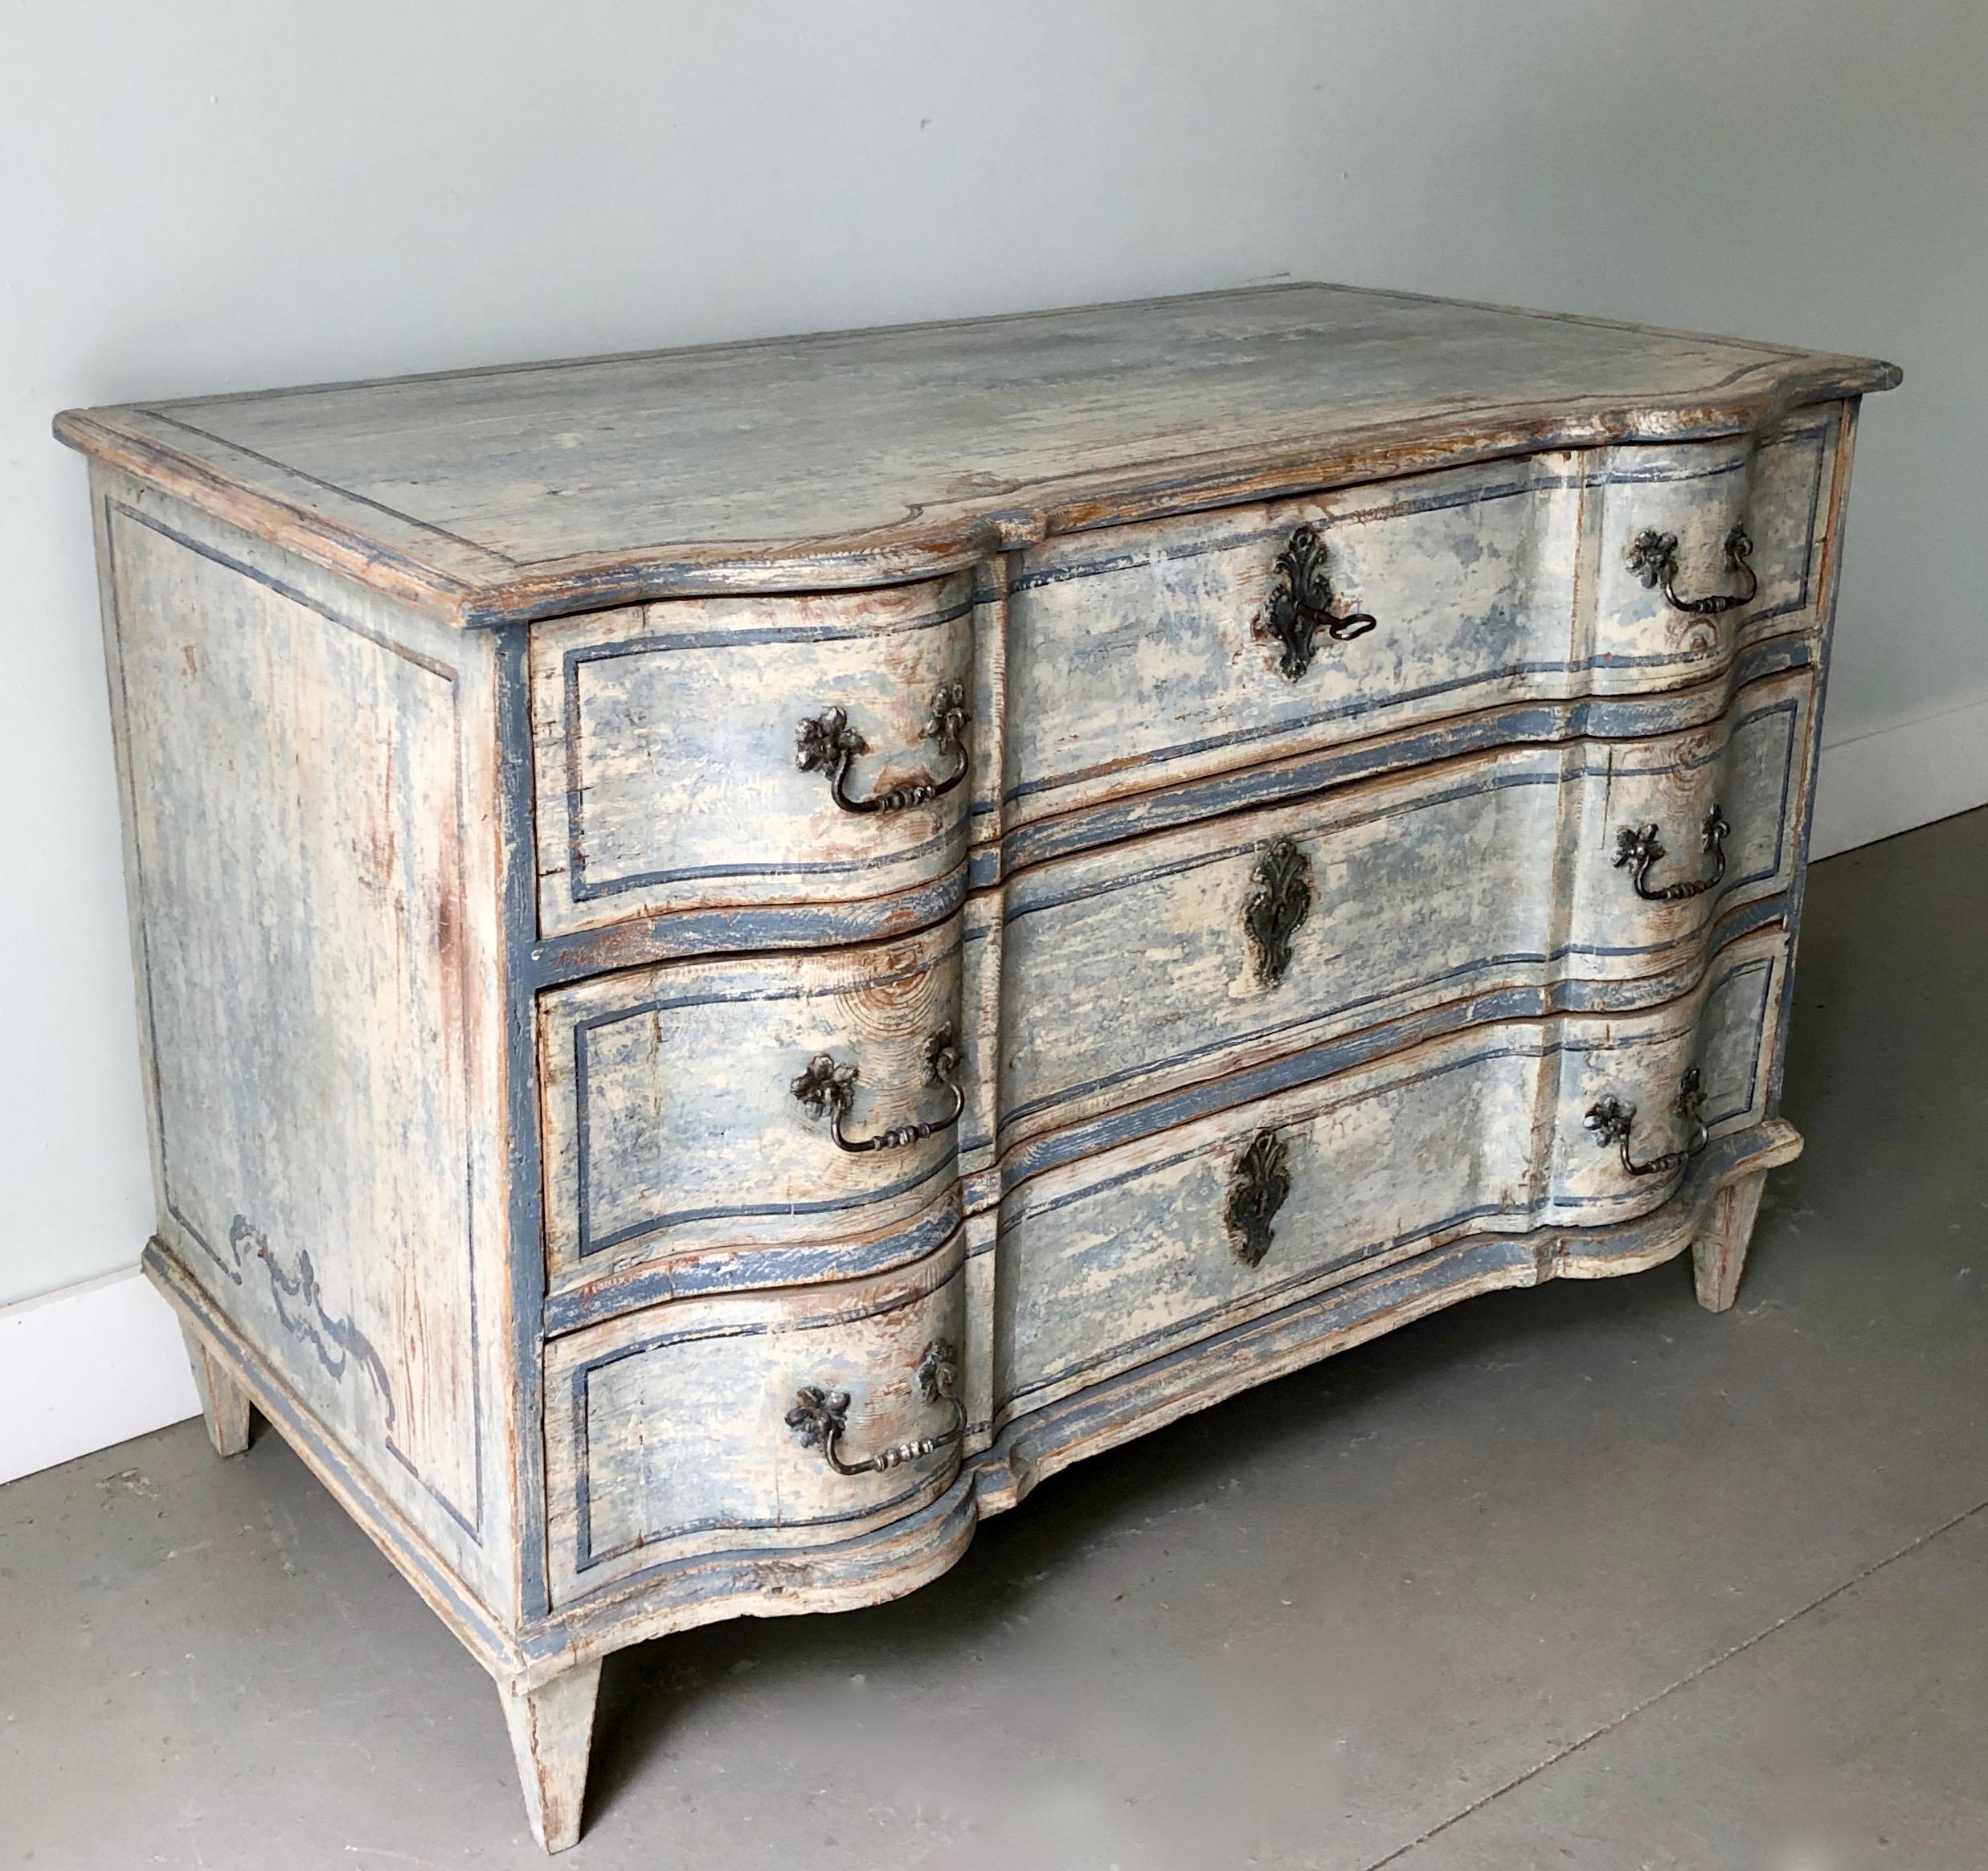 Handsome 18th century German Baroque chest of drawers with elegantly proportioned detailed drawer fronts, with original hardware’s, tapered feet all in wonderful hand rubbed later patina.
 
  